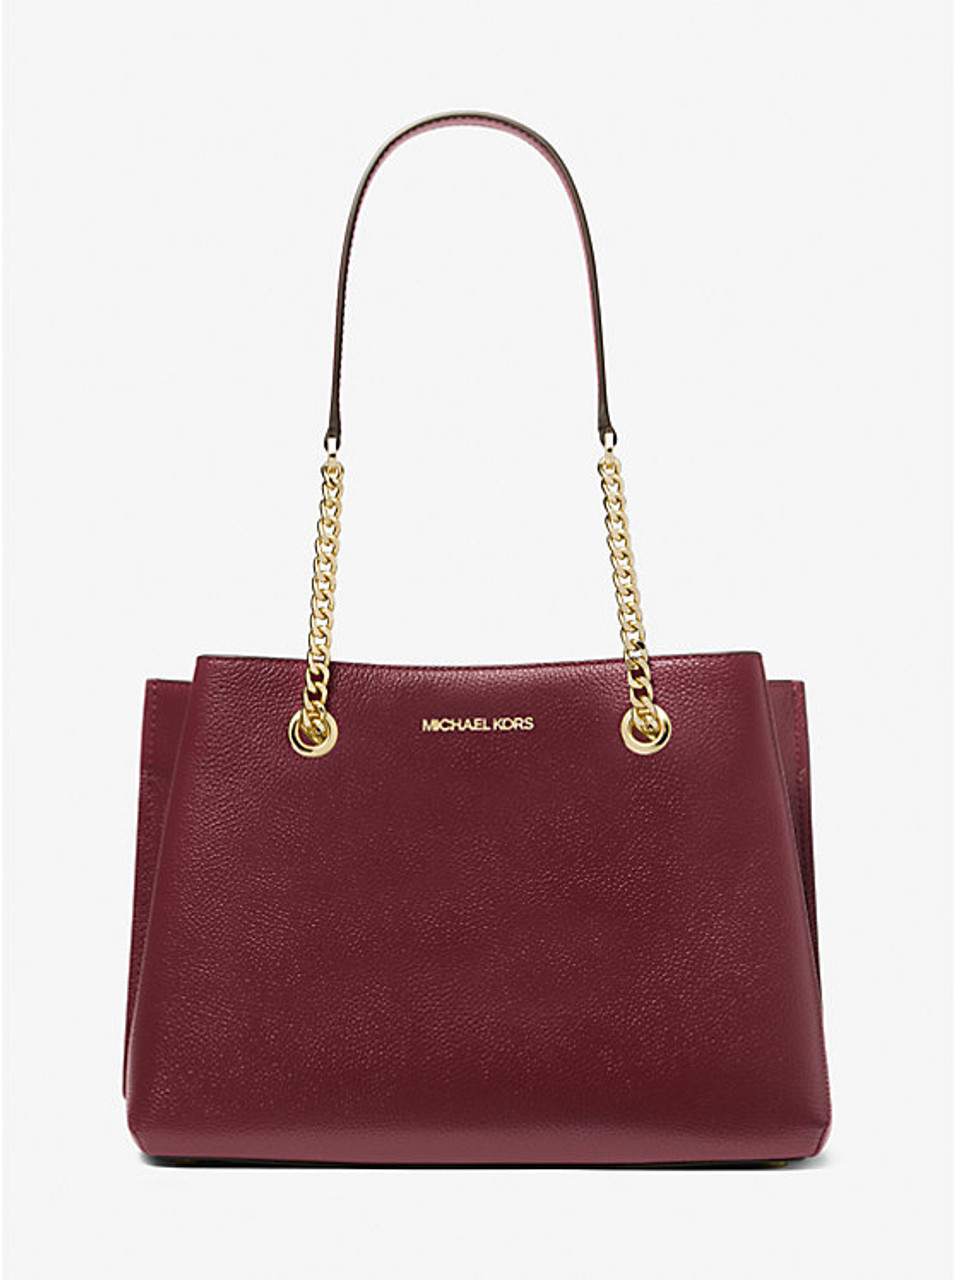 Michael Kors Canada Sale: Save up to 70% off Sale + FREE Shipping - Canadian  Freebies, Coupons, Deals, Bargains, Flyers, Contests Canada Canadian  Freebies, Coupons, Deals, Bargains, Flyers, Contests Canada